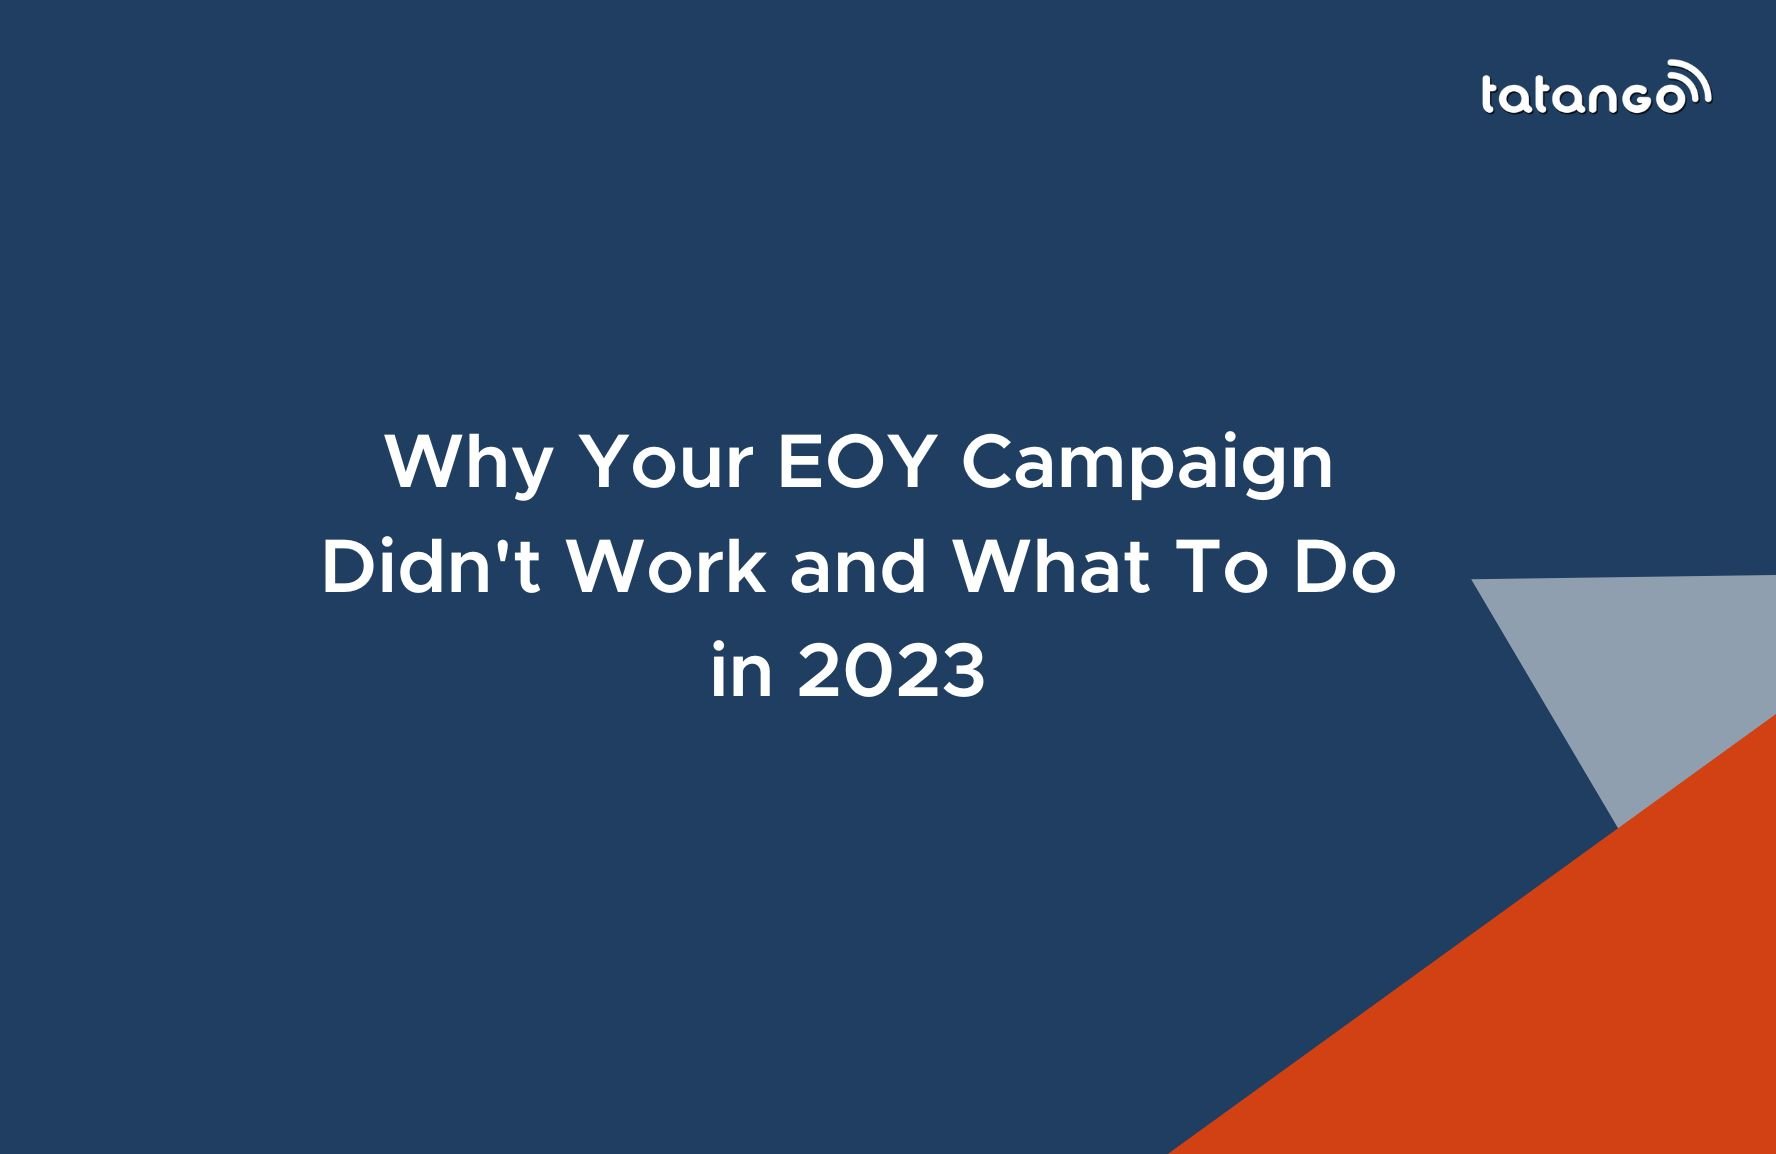 Retrospective - Why Your EOY Campaign Didn't Work and What To Do in 2023